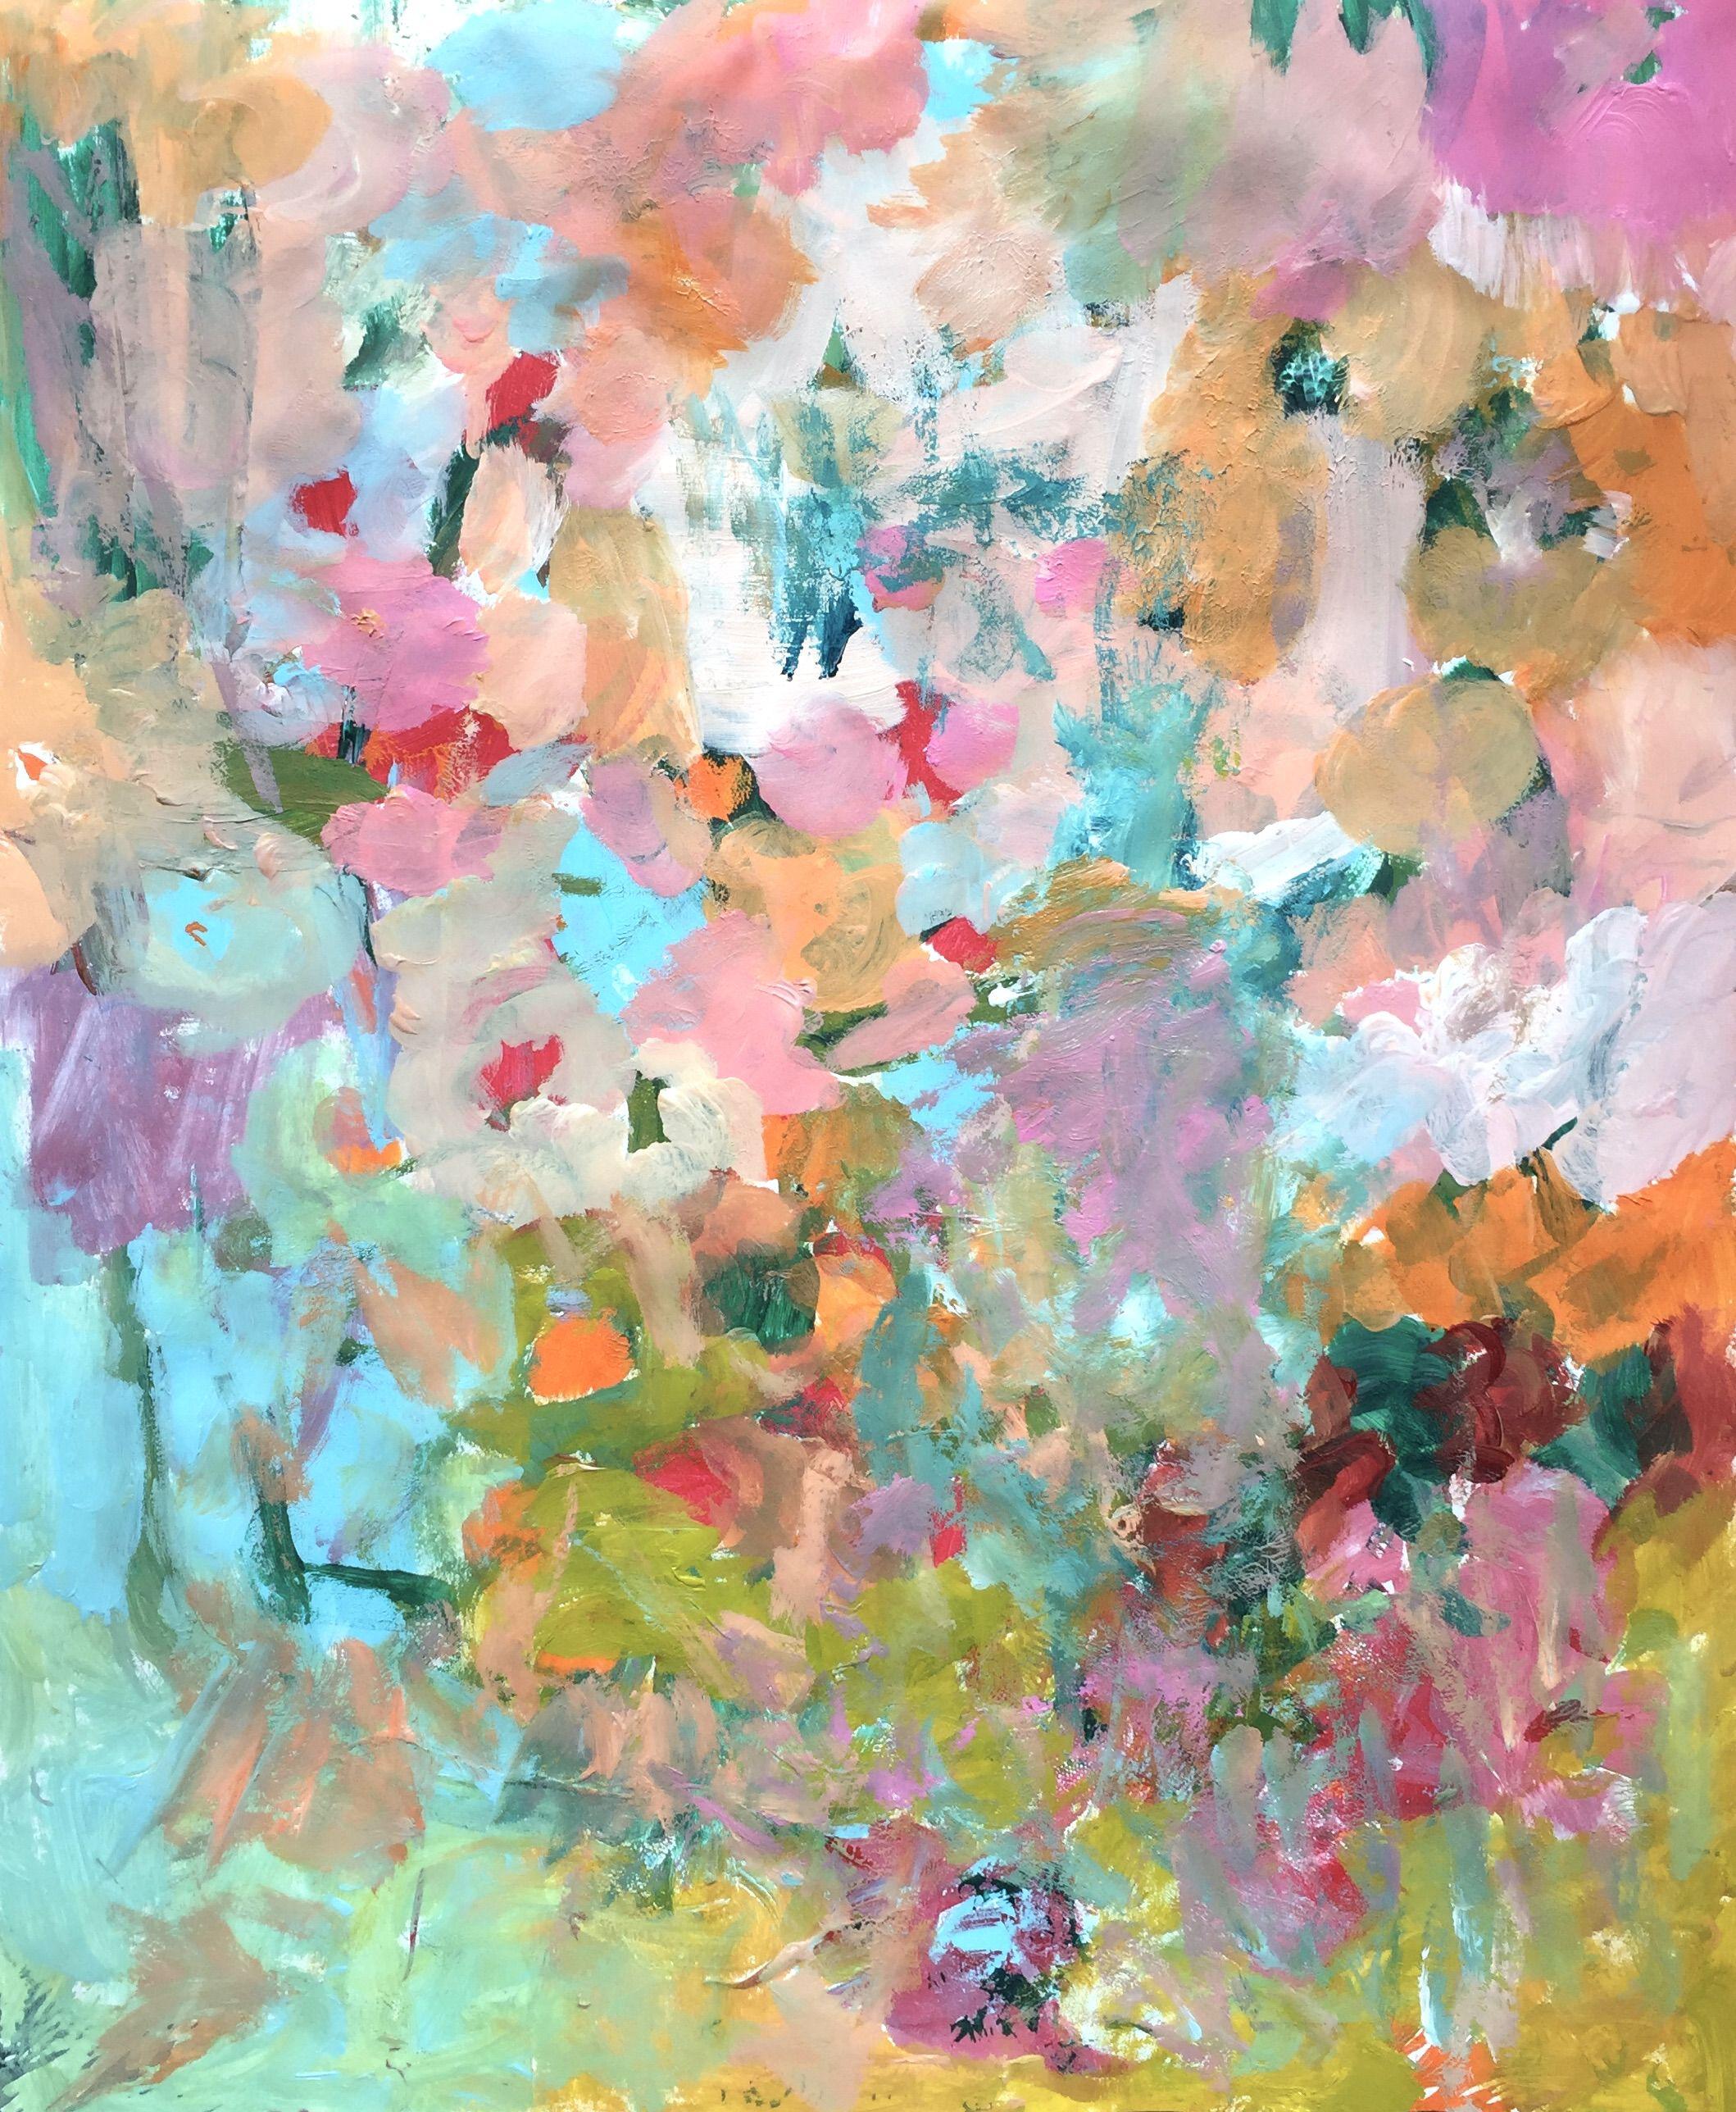 "OsterÃ¼berraschung (Easter Surprise)" is a colorful acrylic painting on paper. It is painted gestural and dynamic. The choice of colors is positive, bright and creates a good mood. It is reminiscent of flowers, blossoms, spring, the beauty of